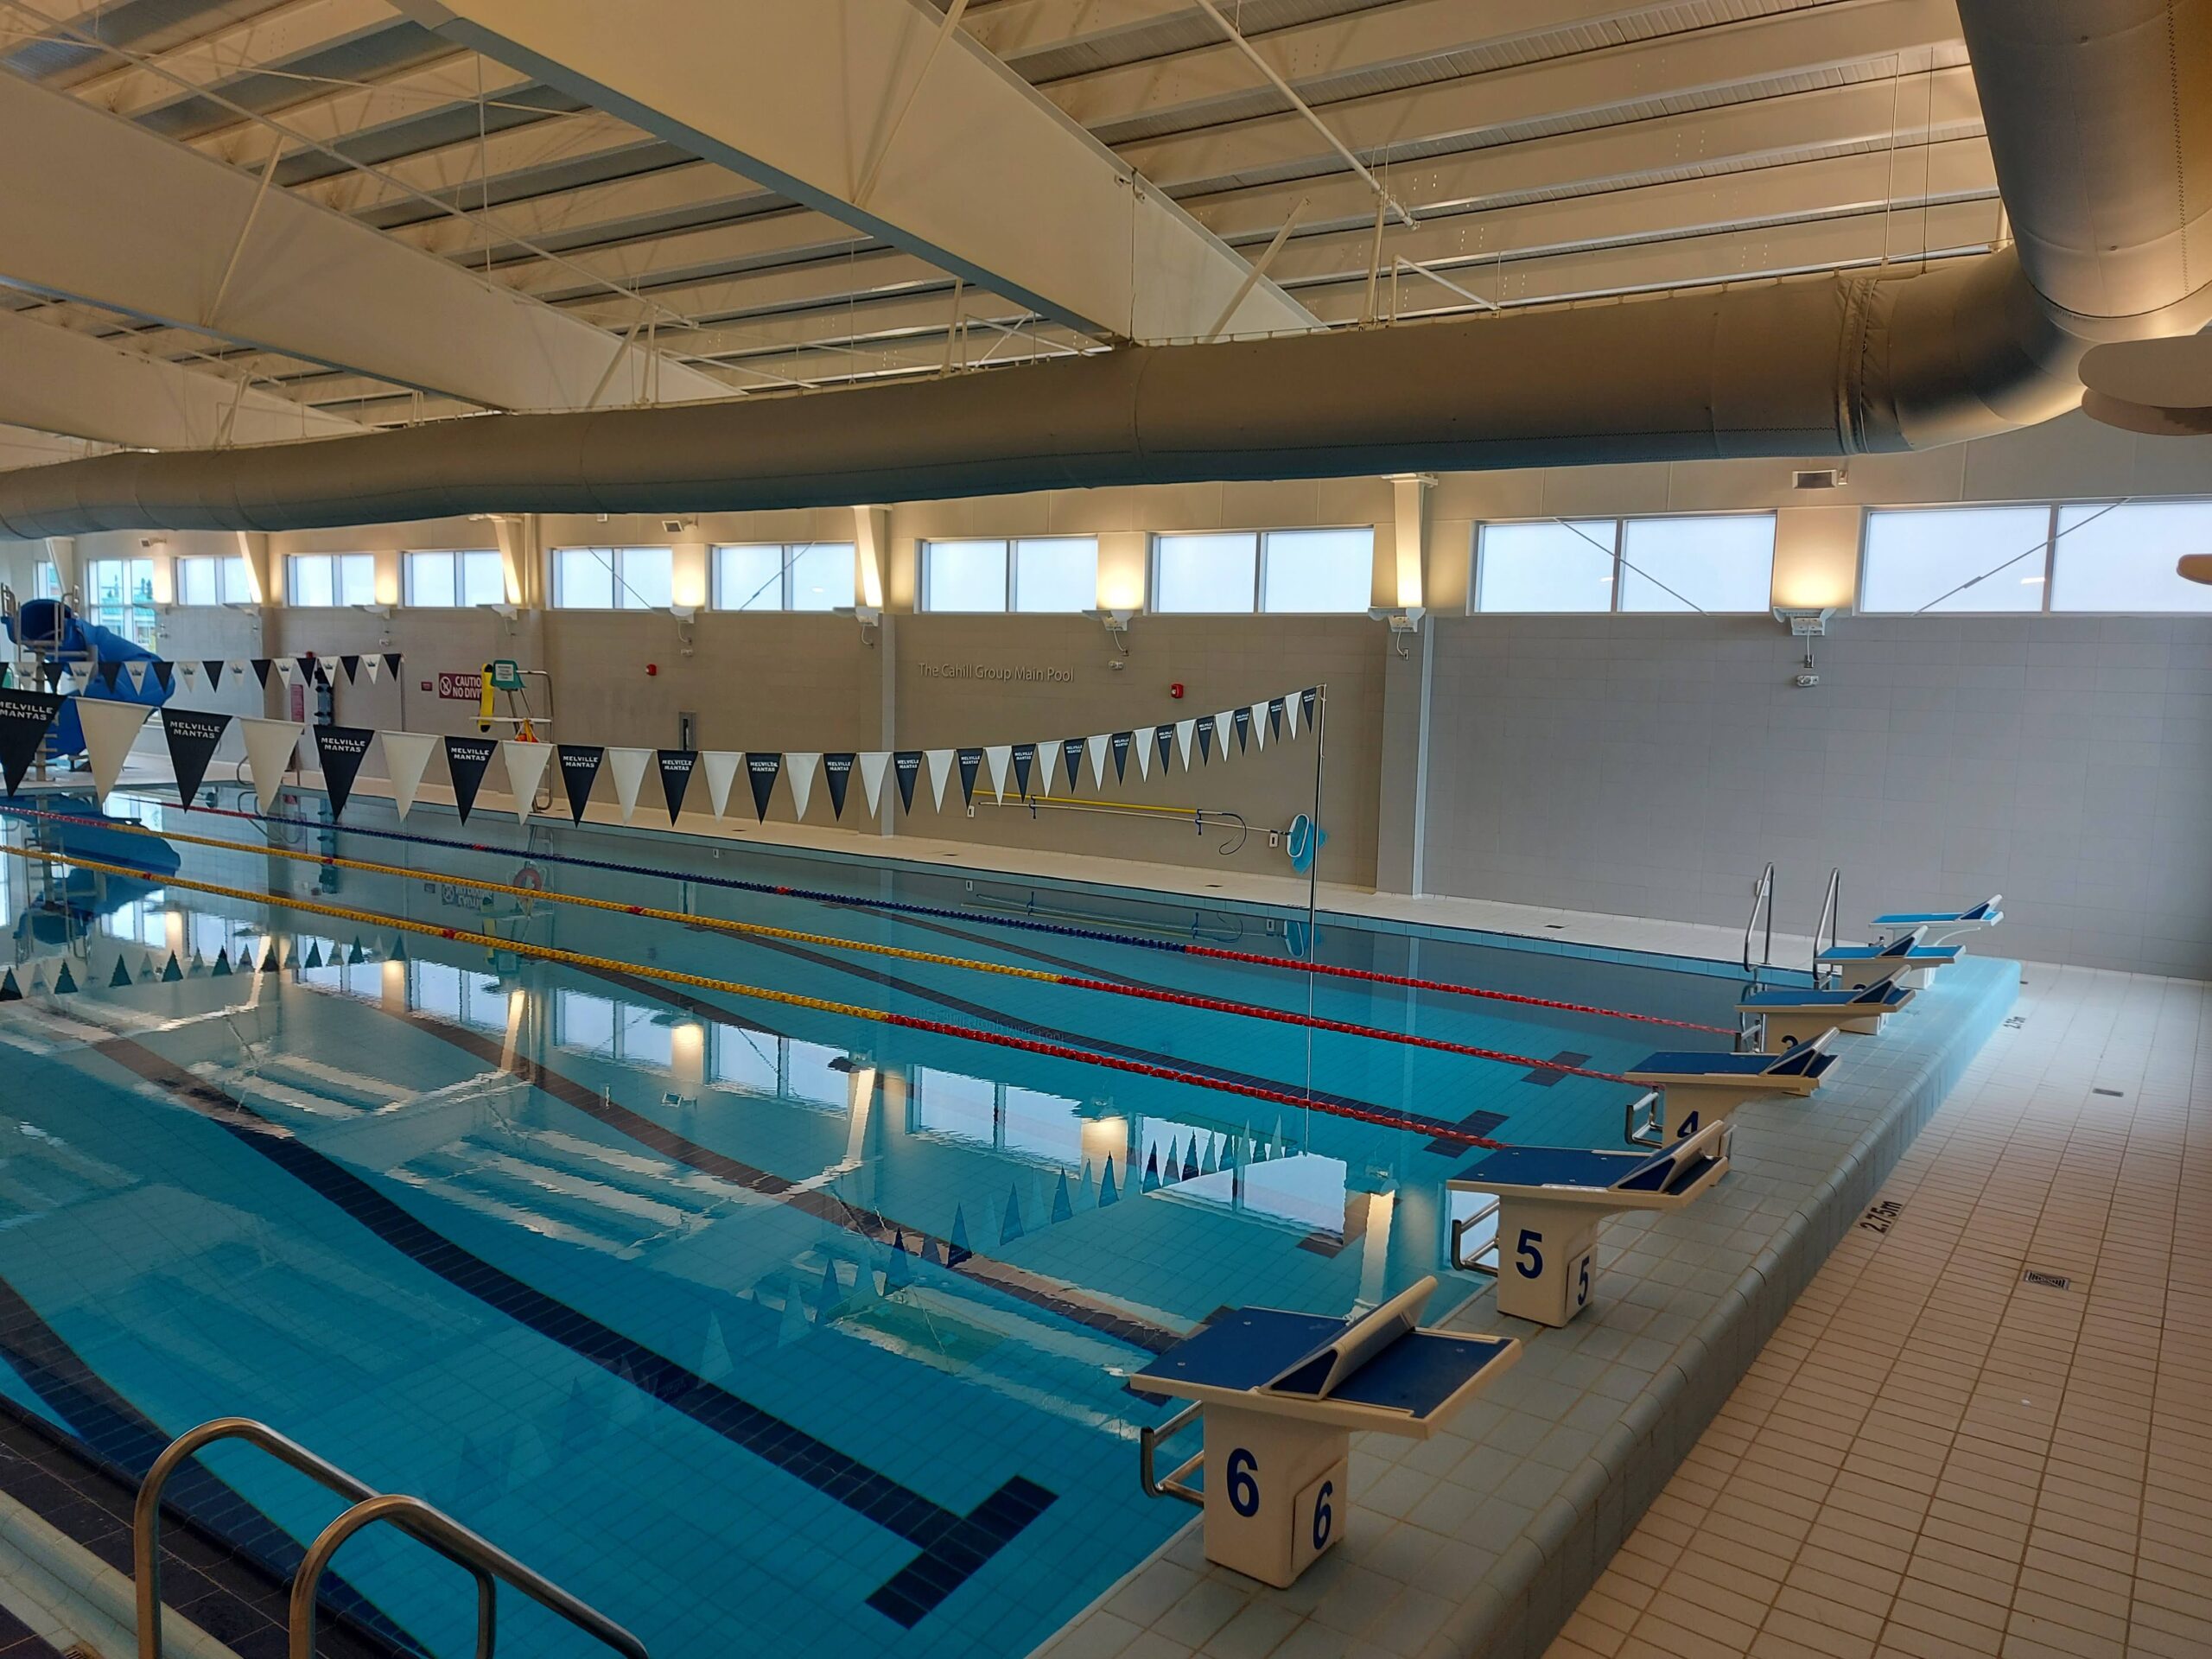 a view of the deep end of a pool with diving blocks